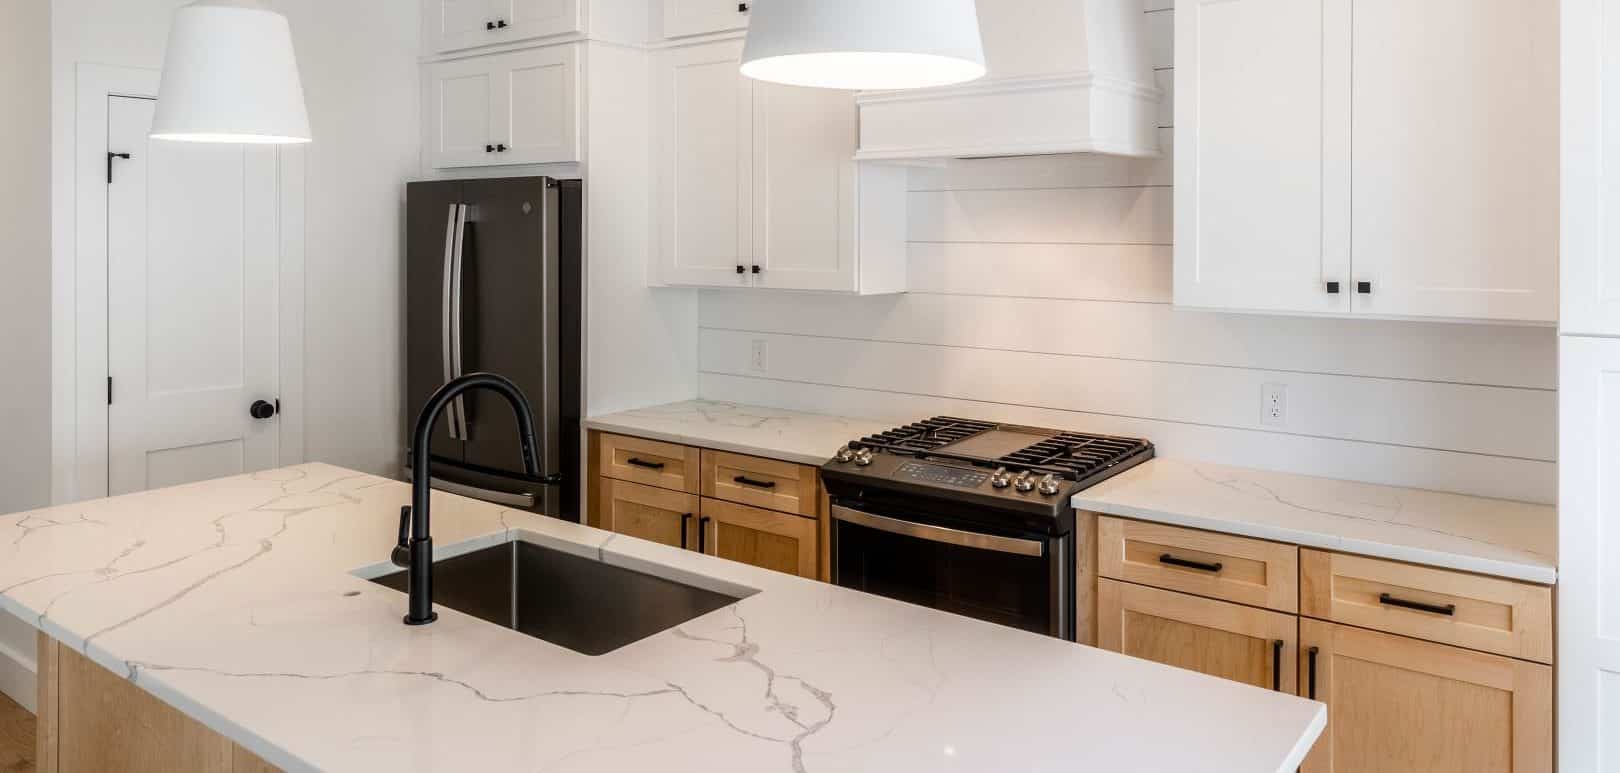 A compact white kitchen with white upper cabinets with black hardware pulls, and lower cabinets finished in a natural maple color. The lower cabinets, as well as the kitchen island across from them, are topped with a marble-like white quartz. The kitchen sink is located on the island, and the oven range against the wall. Behind the oven range is a white shiplap backsplash.